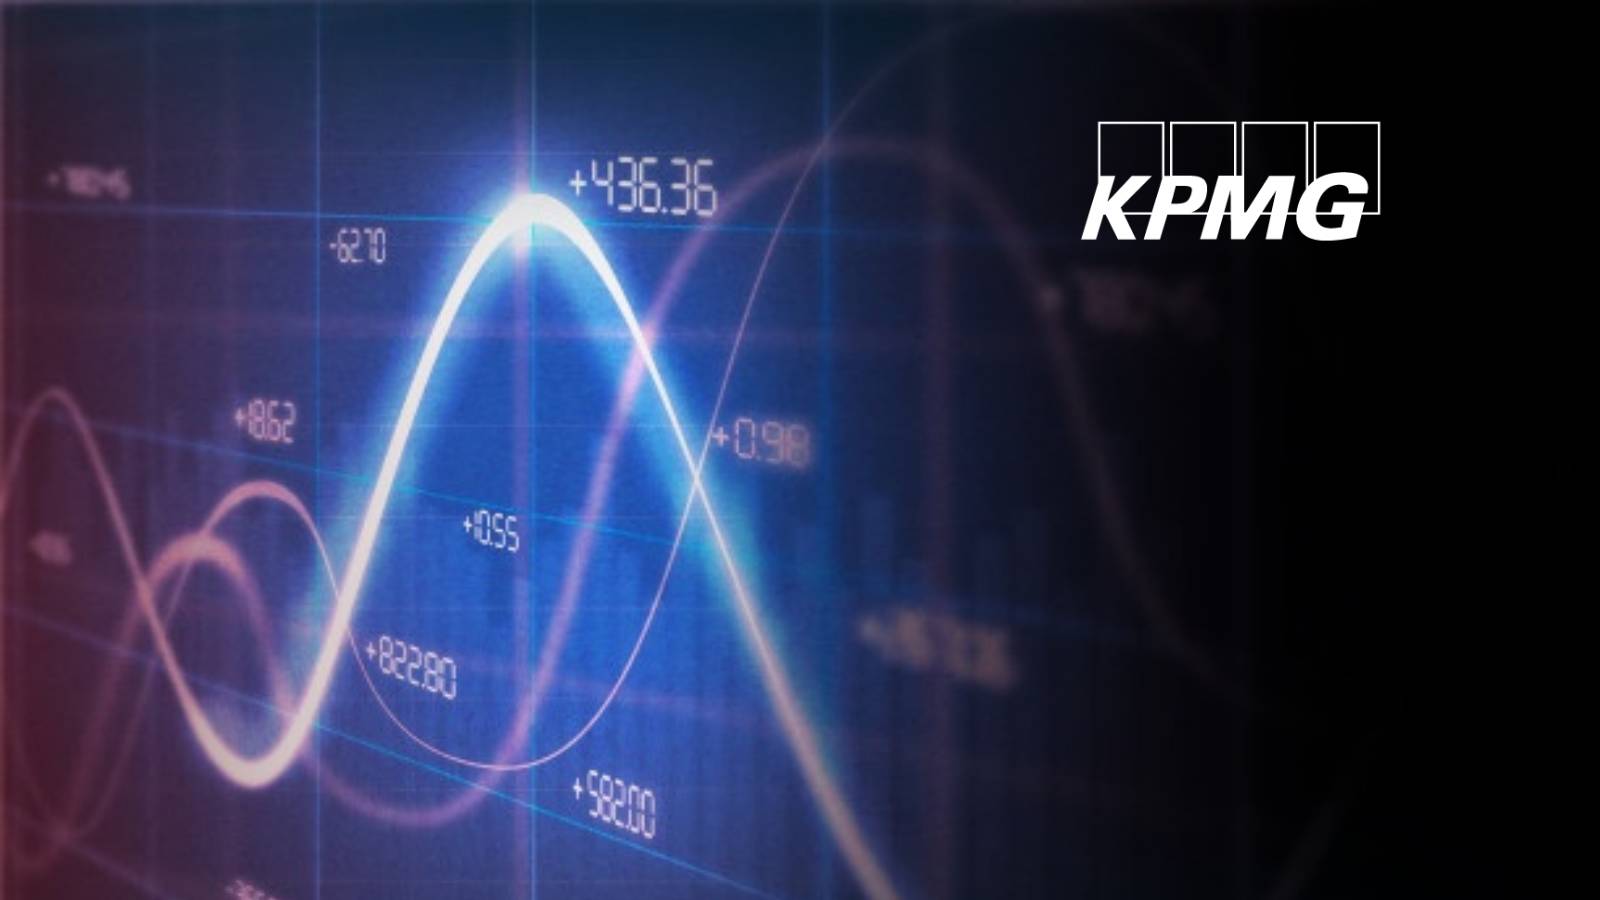 Companies Shift Emerging Tech Investments Amid COVID 19: KPMG